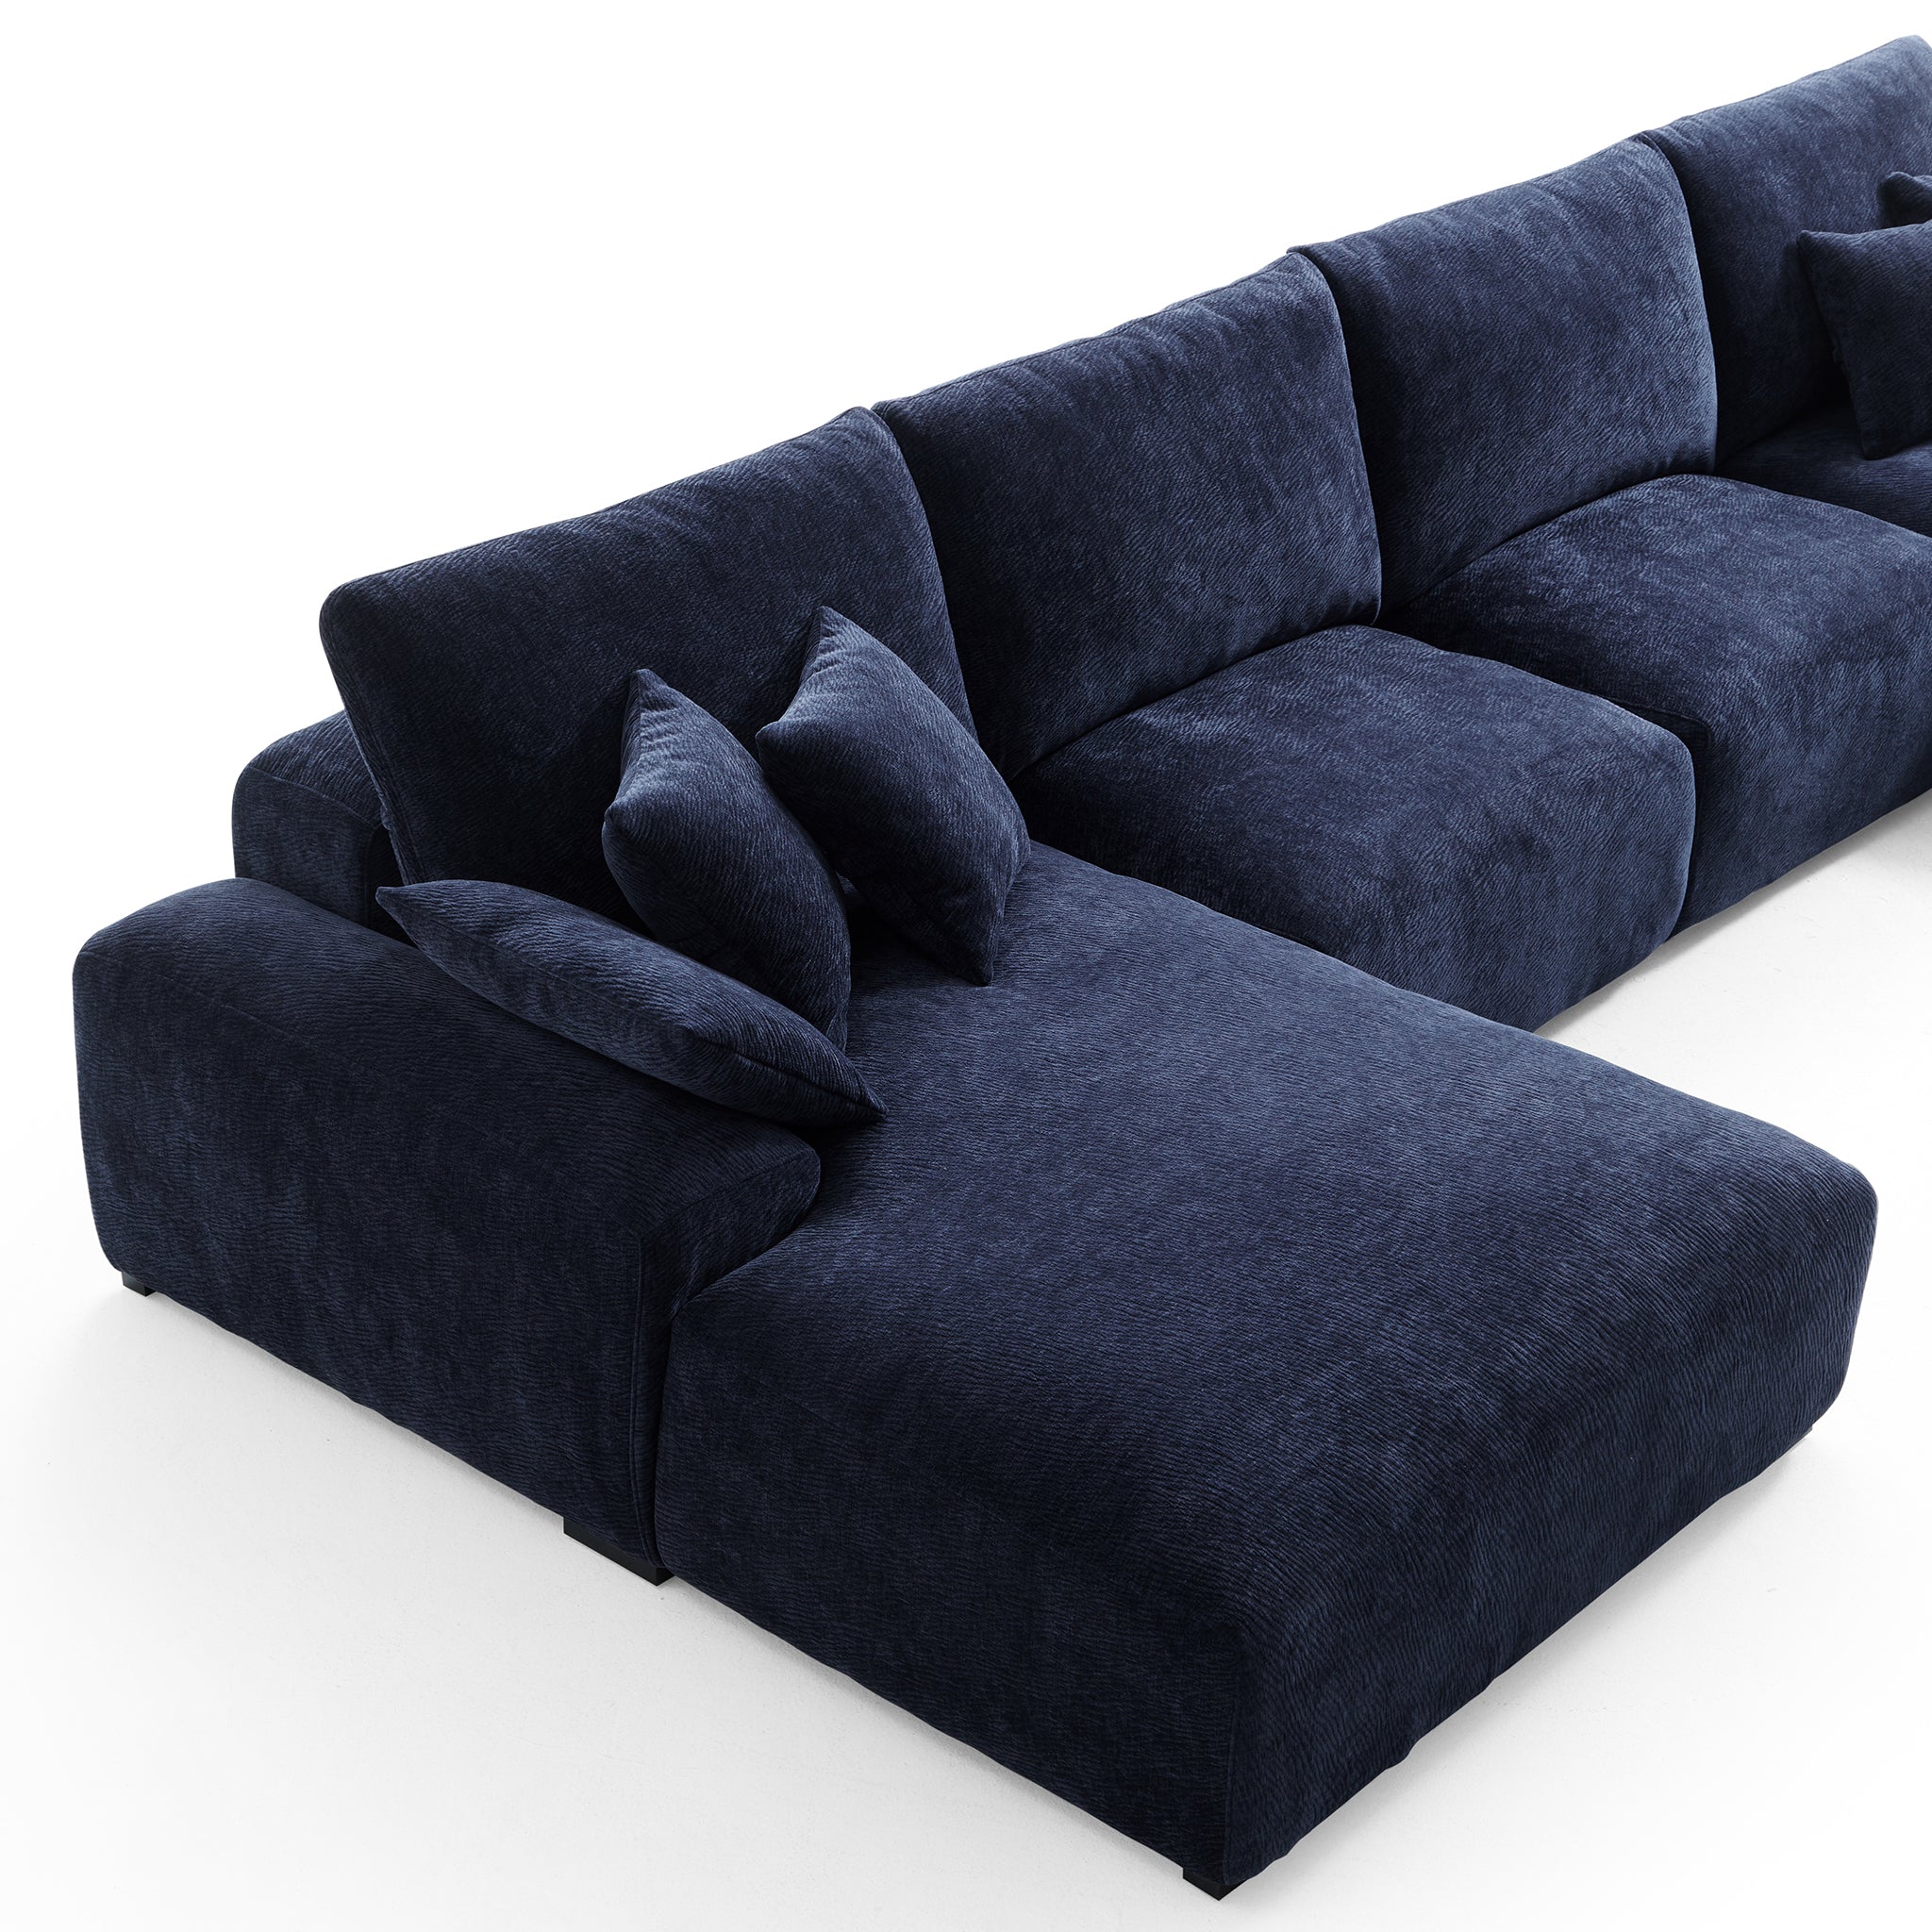 The Empress Navy Blue U-Shaped Sectional